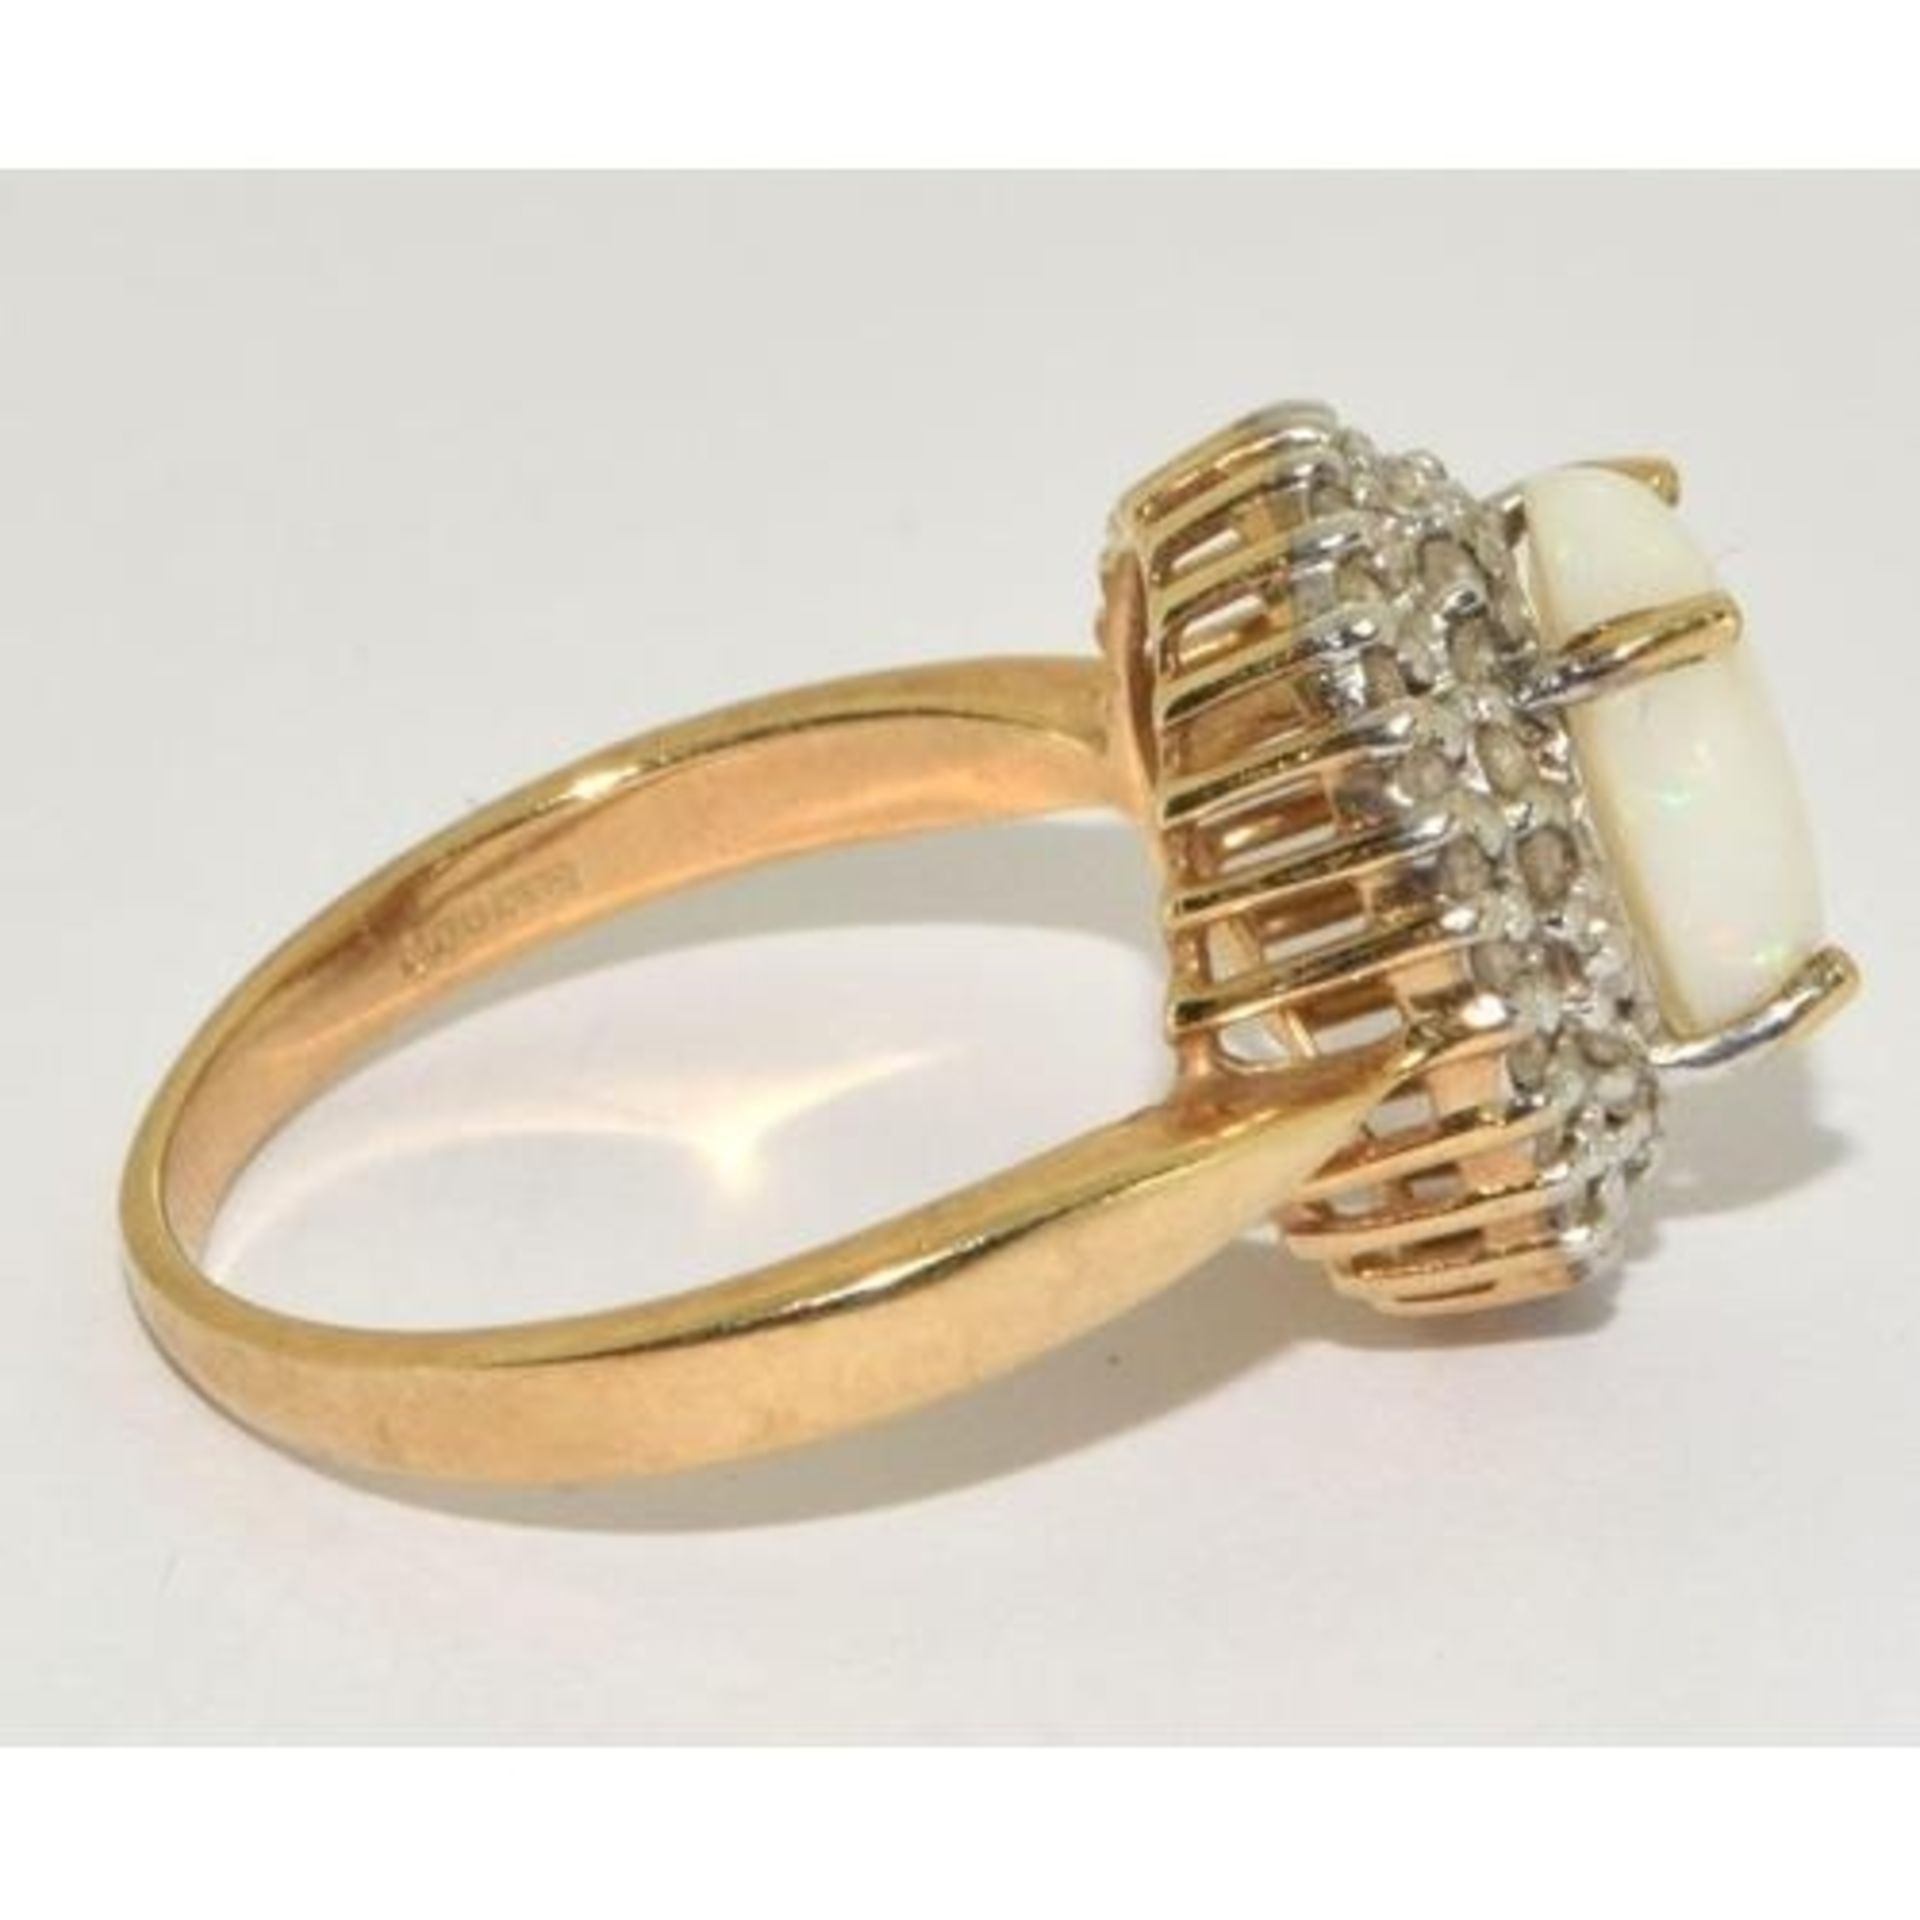 9ct gold ladies Diamond and Opal statement ring in a halo design setting approx size N - Image 4 of 5